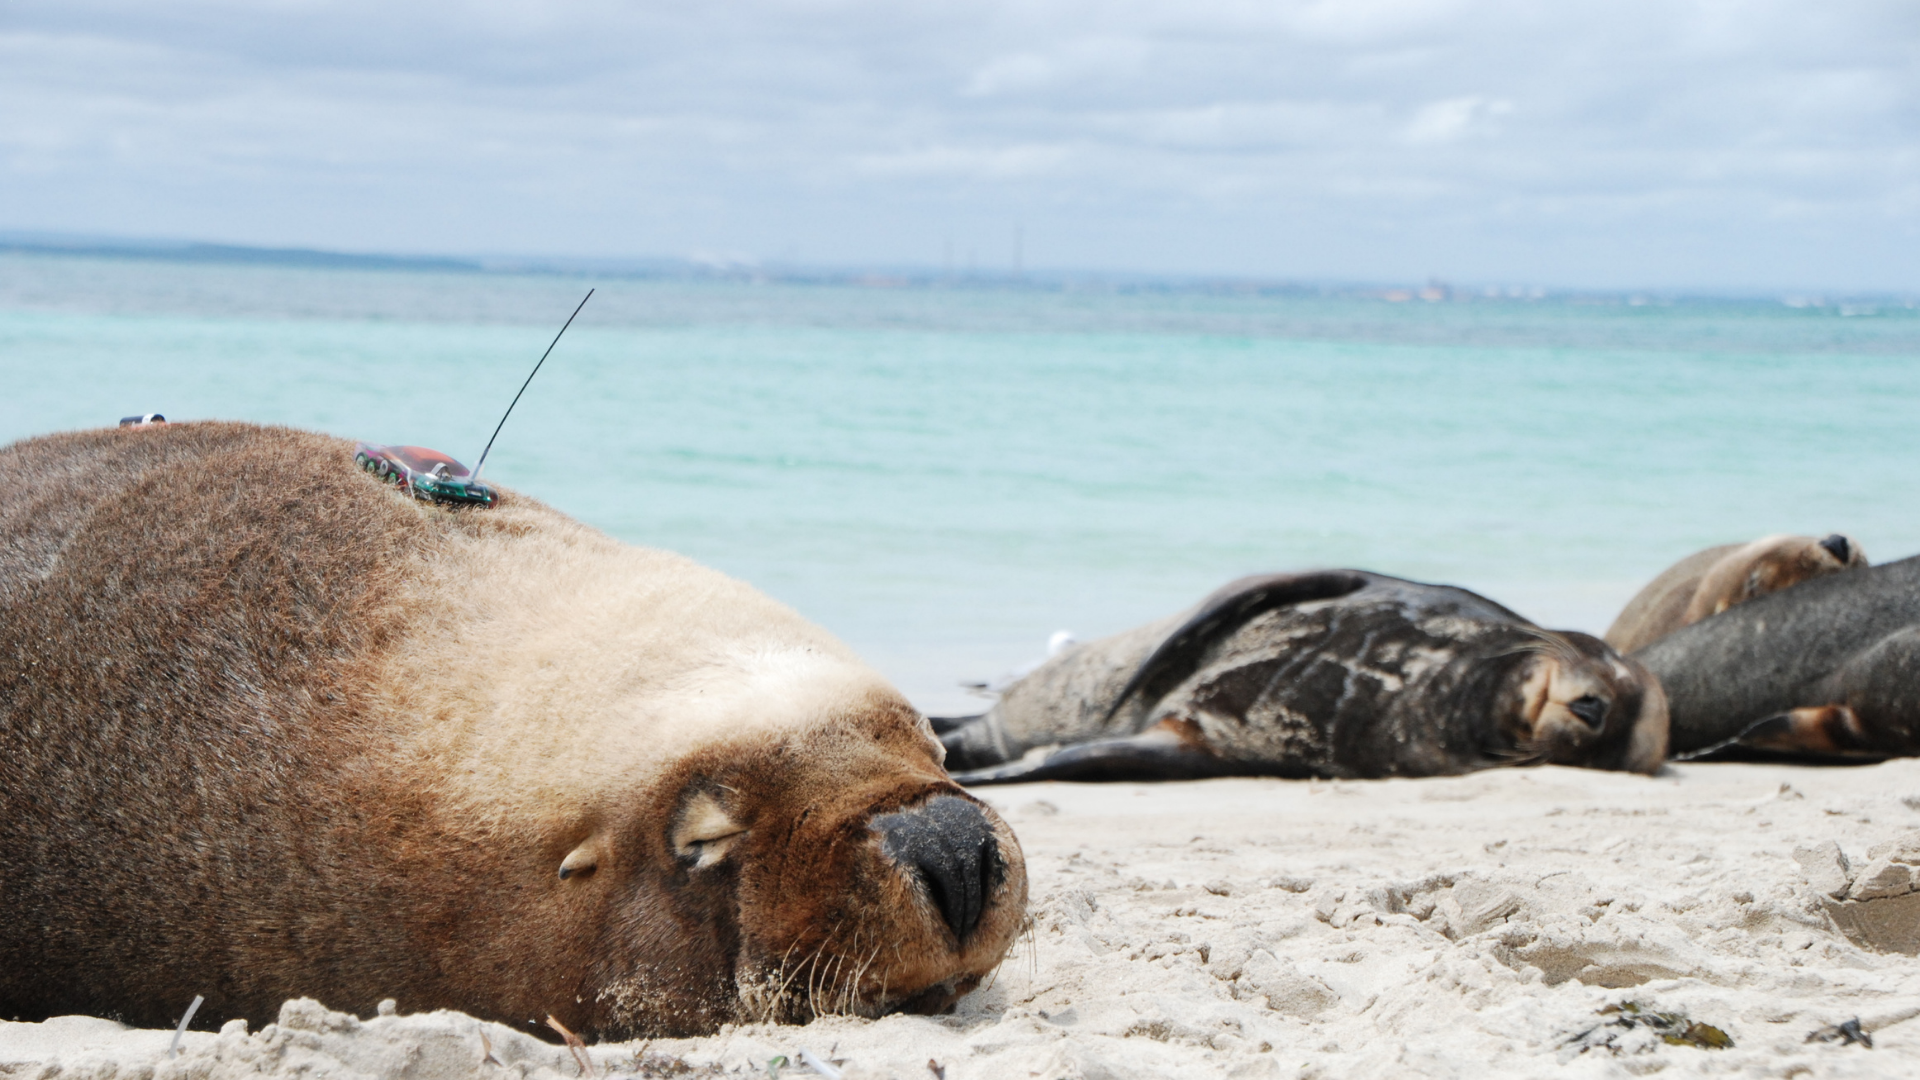 https://cdn.aucklandunlimited.com/zoo/assets/media/sea-lion-satellite-tagging-2.png